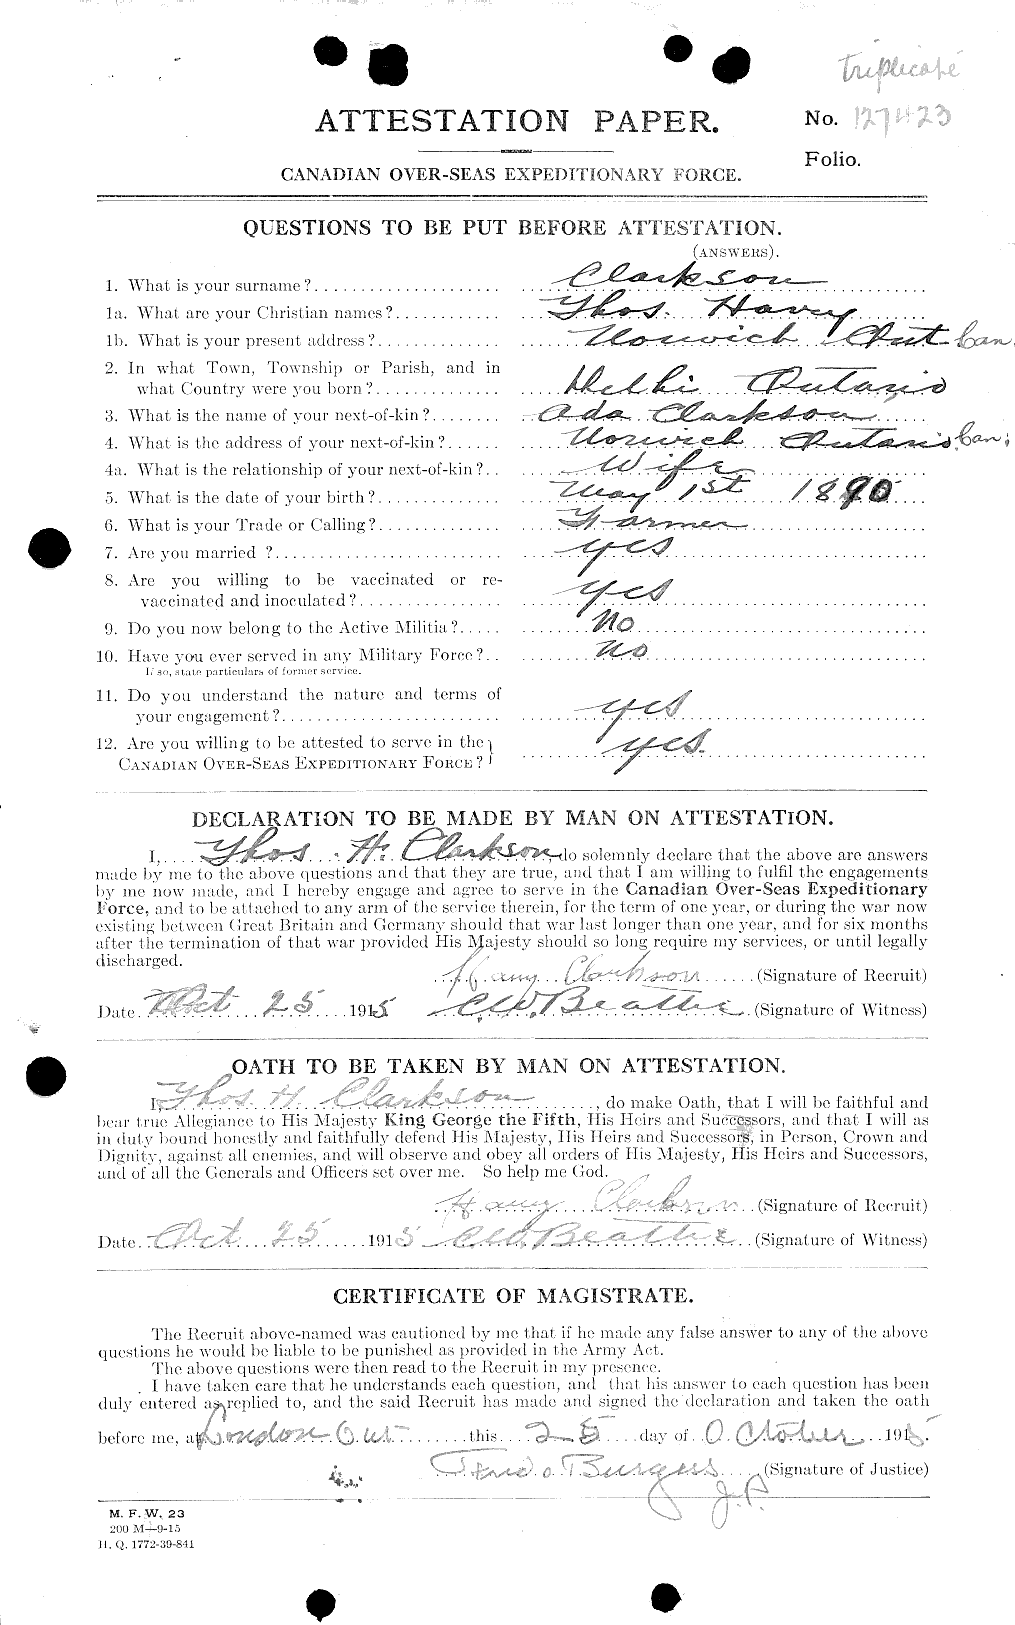 Personnel Records of the First World War - CEF 019013a